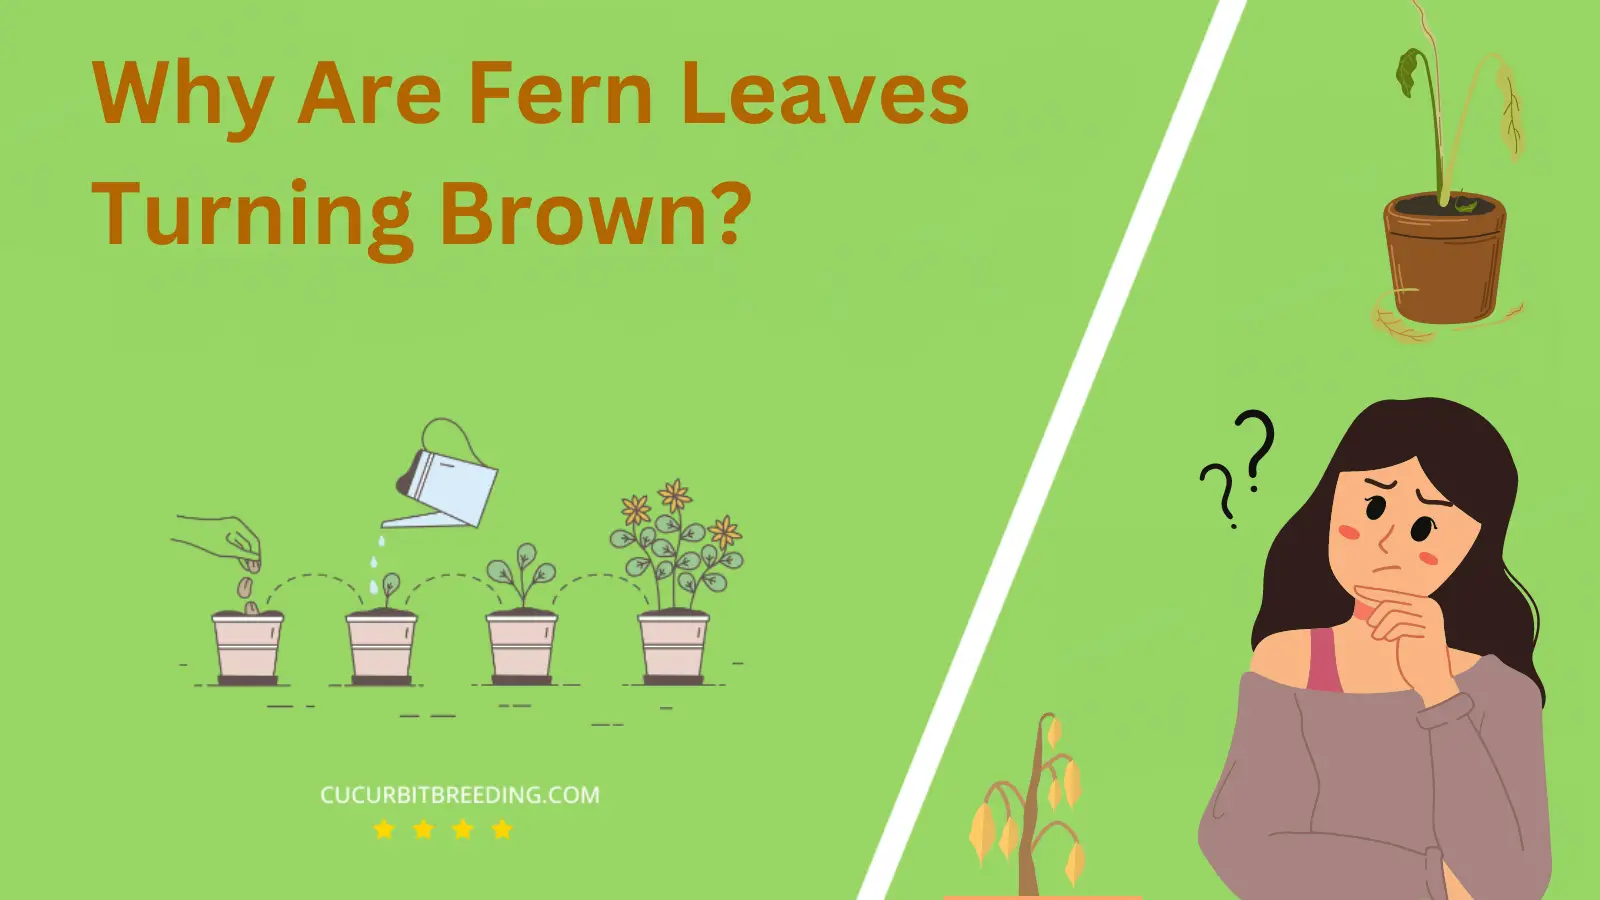 Why Are Fern Leaves Turning Brown